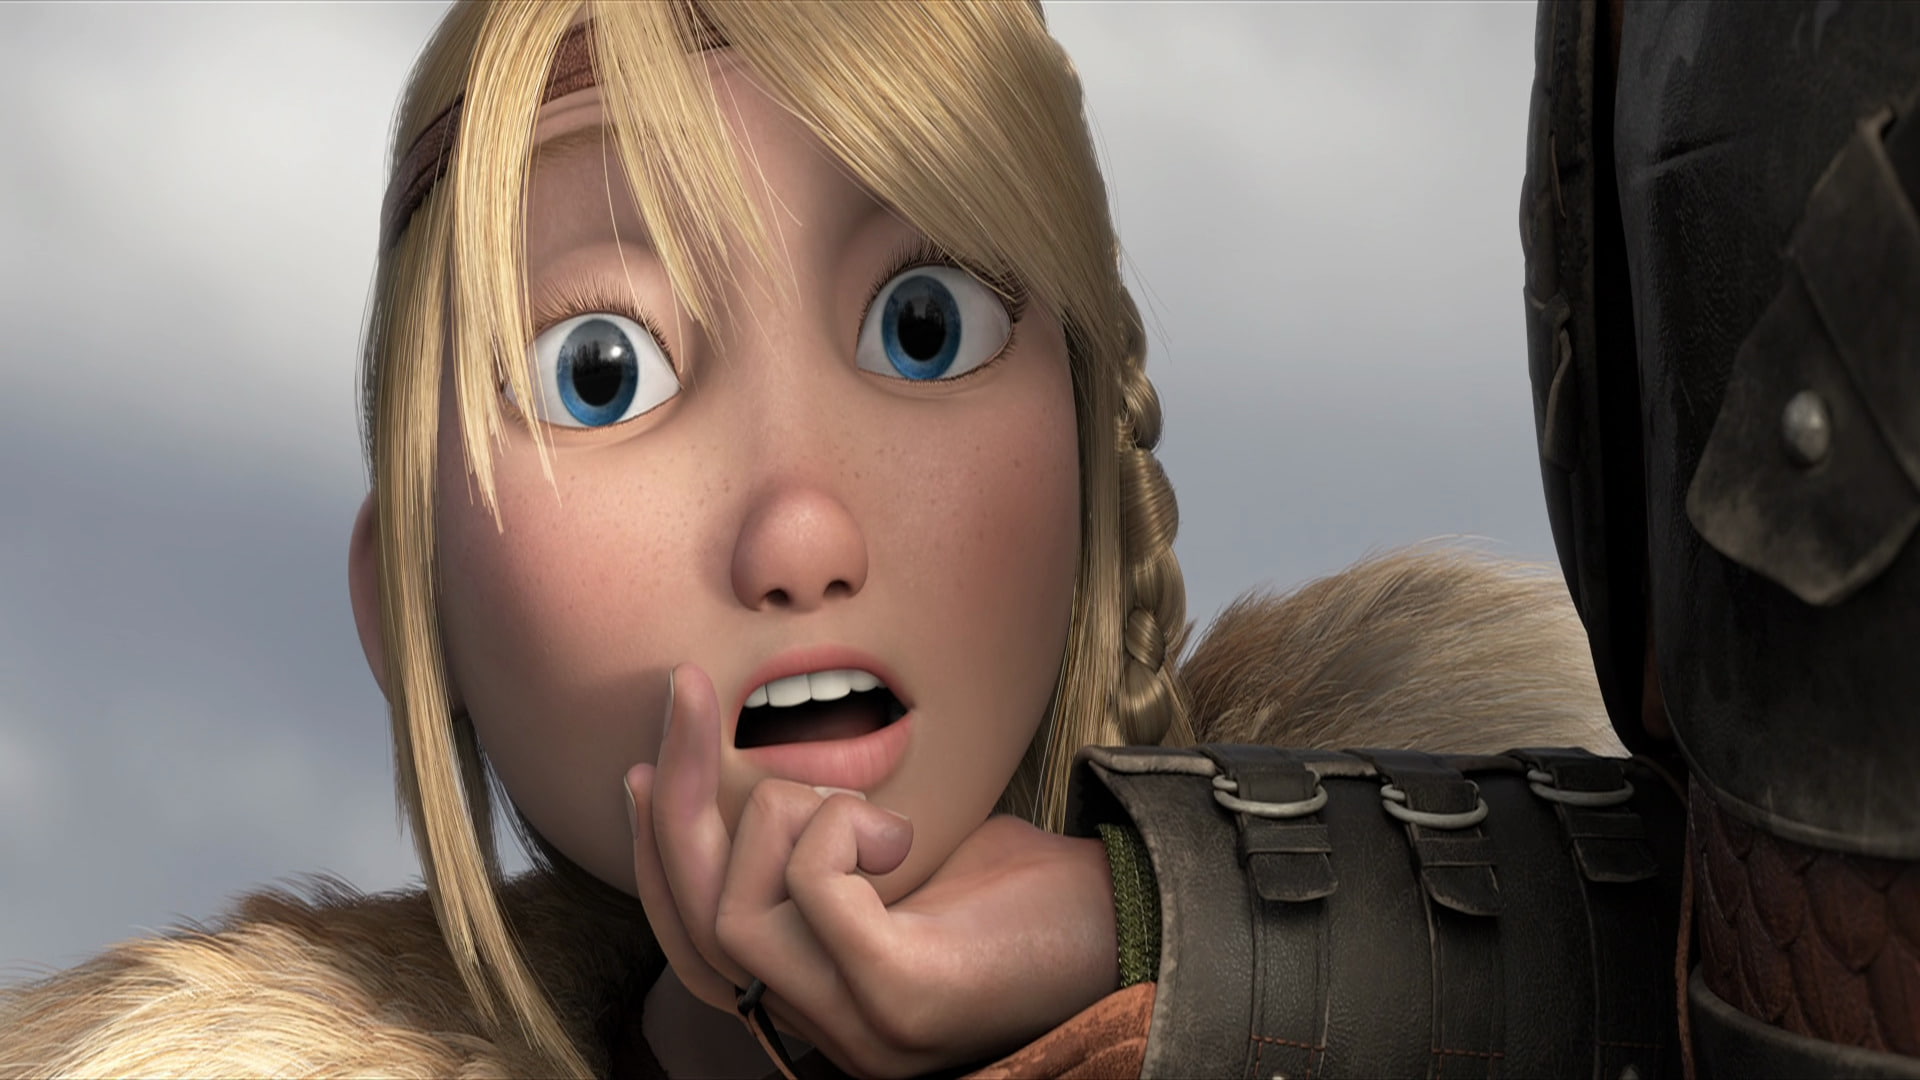 Free Download Hd Wallpaper Movie How To Train Your Dragon 2 Astrid How To Train Your